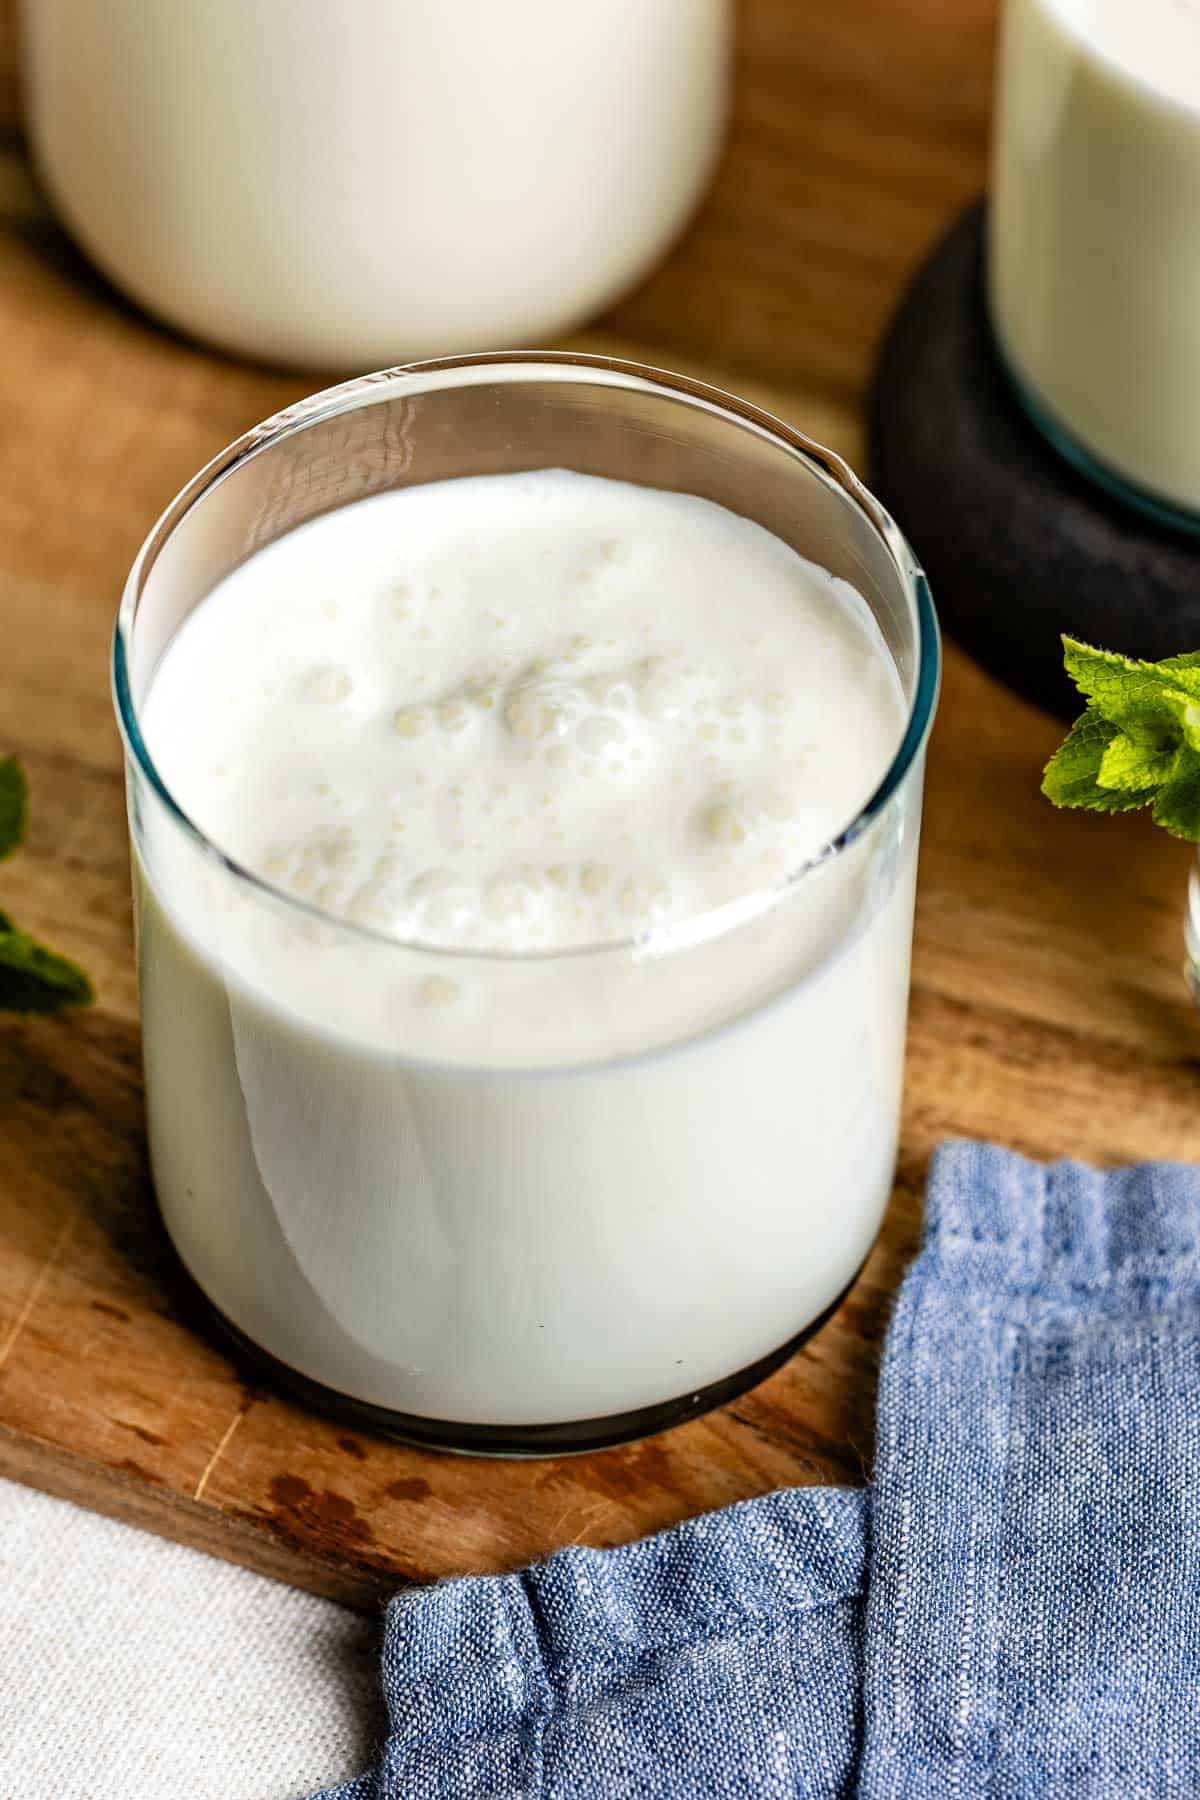 A glass of froth ayran in a glass from the front view.